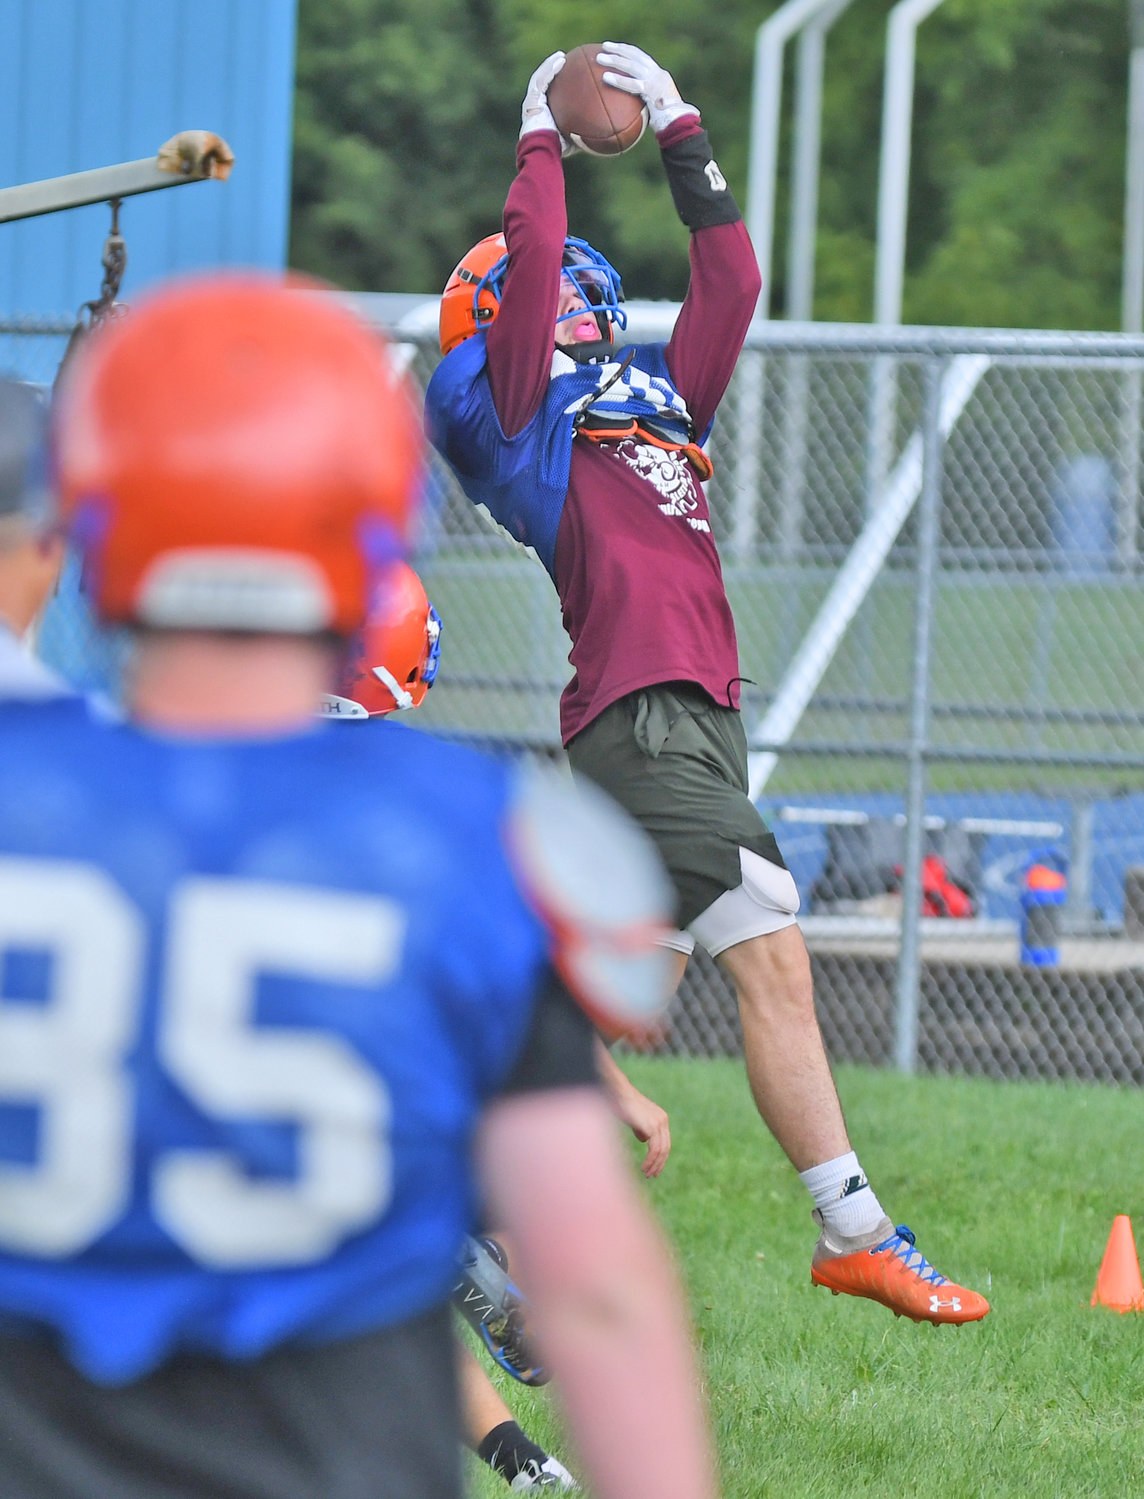 Oneida senior wide receiver Hayden Freebern jumps to make a catch during a preseason practice. He's back on the field after missing some time last year with an injury.